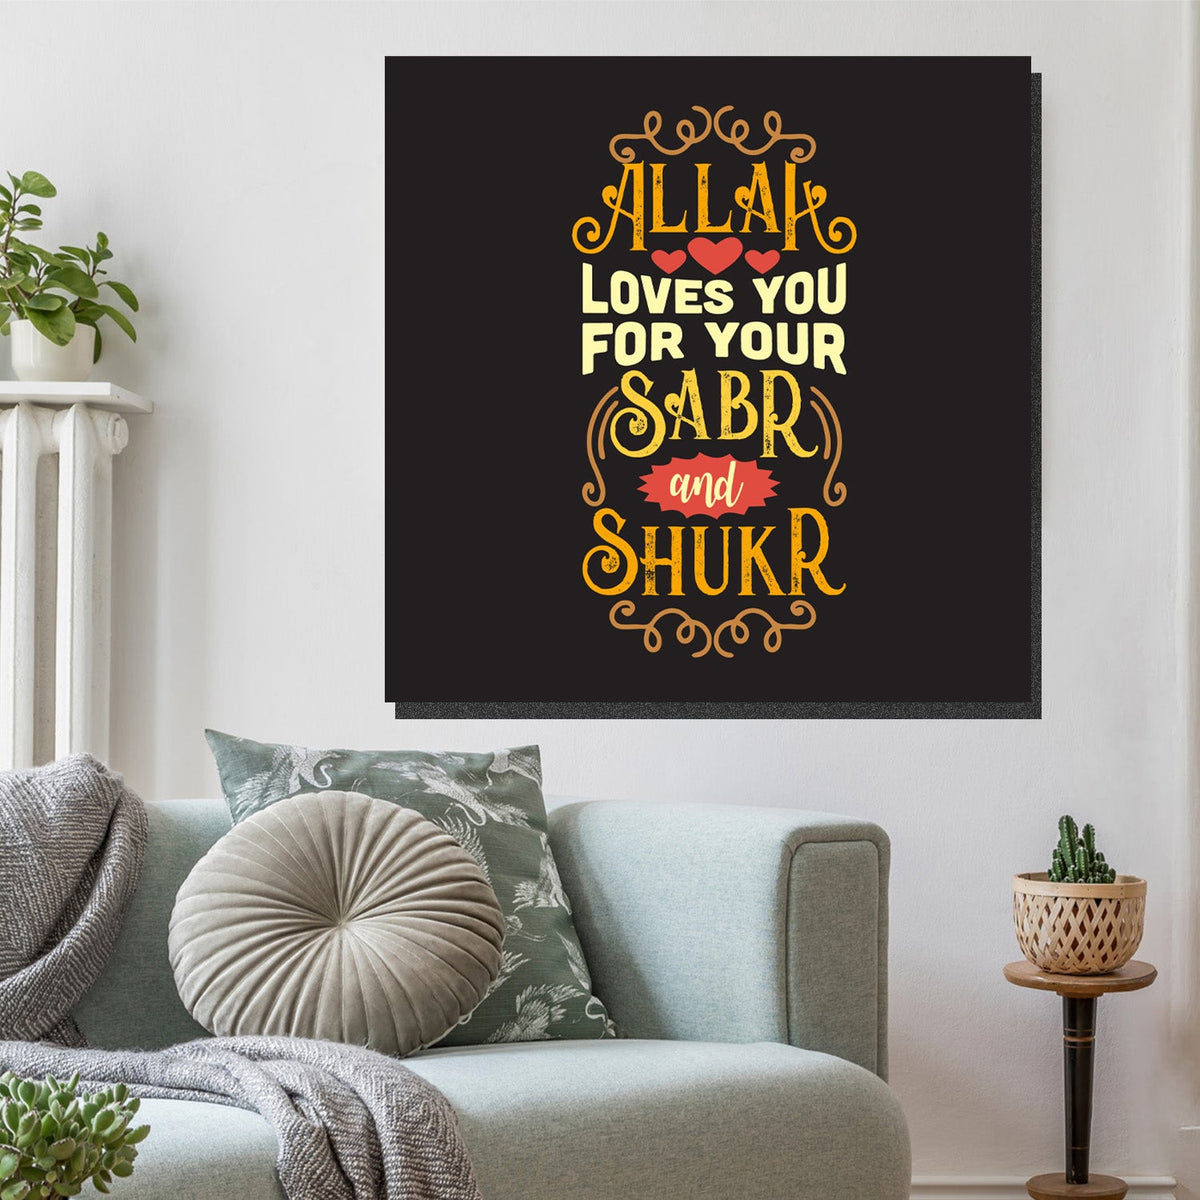 https://cdn.shopify.com/s/files/1/0387/9986/8044/products/AllahLovesYouCanvasArtprintStretched-3.jpg